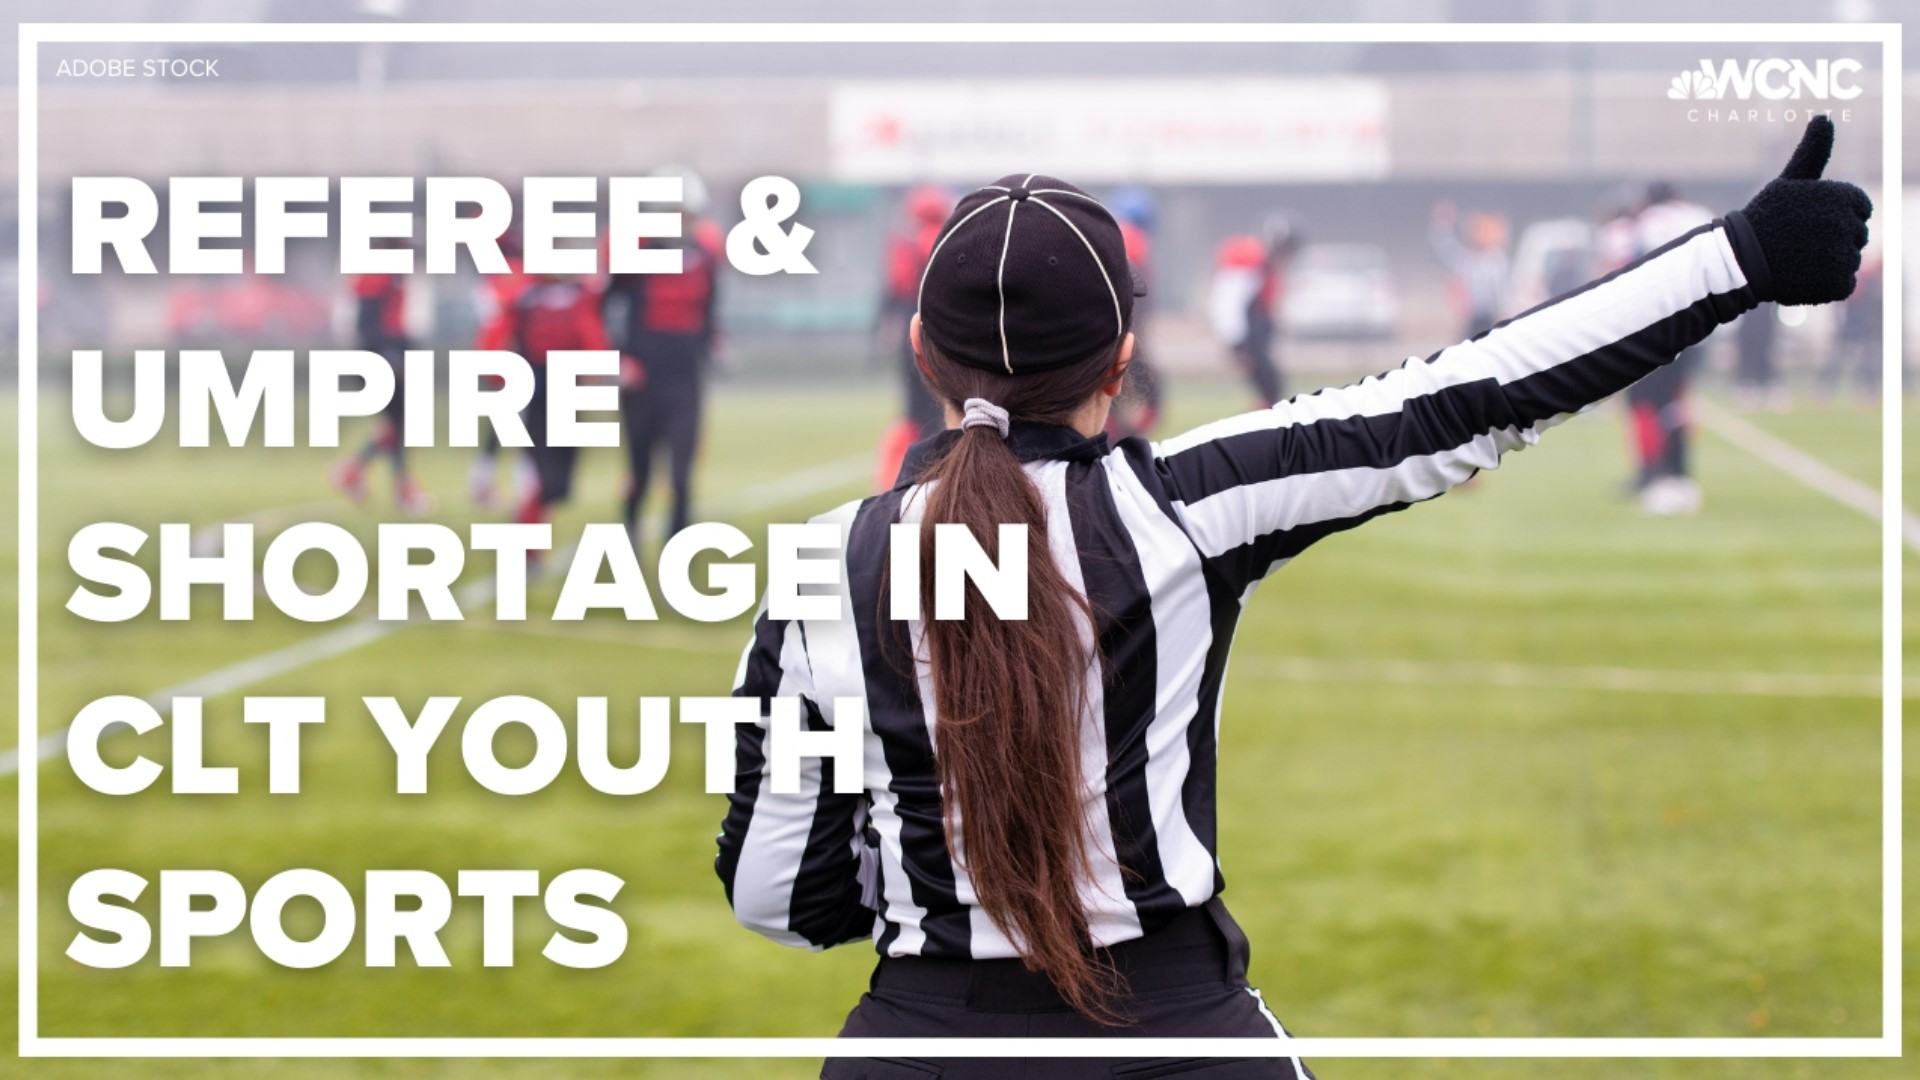 It's even more of a struggle with the demand for youth sports rising.